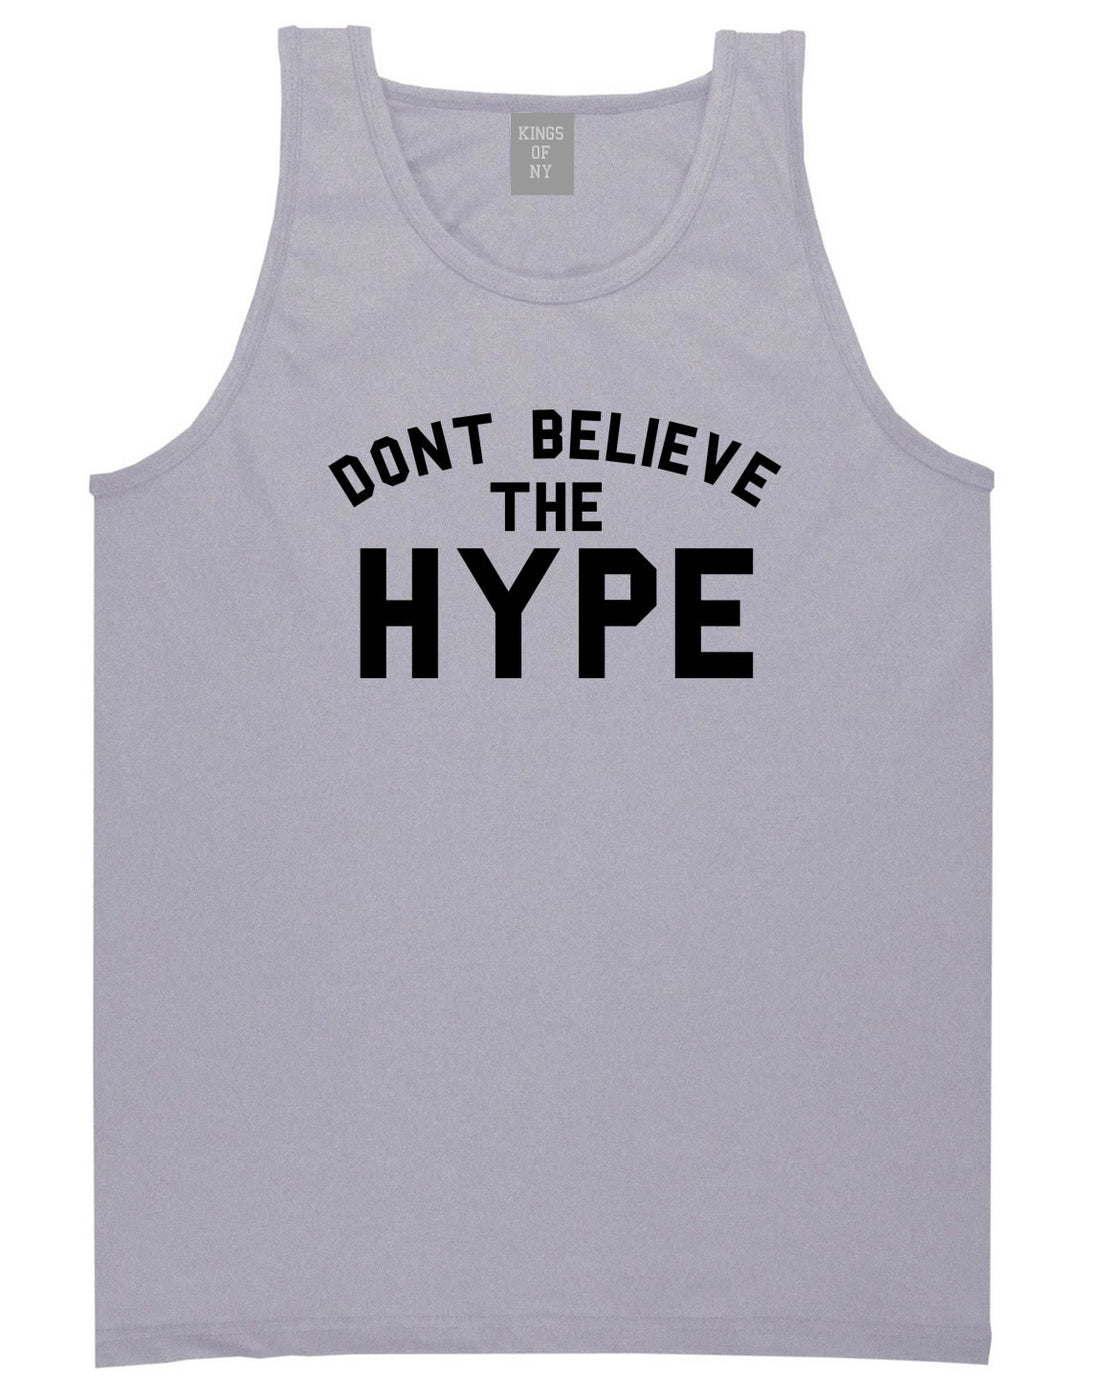 Don't Believe The Hype Tank Top in Grey By Kings Of NY